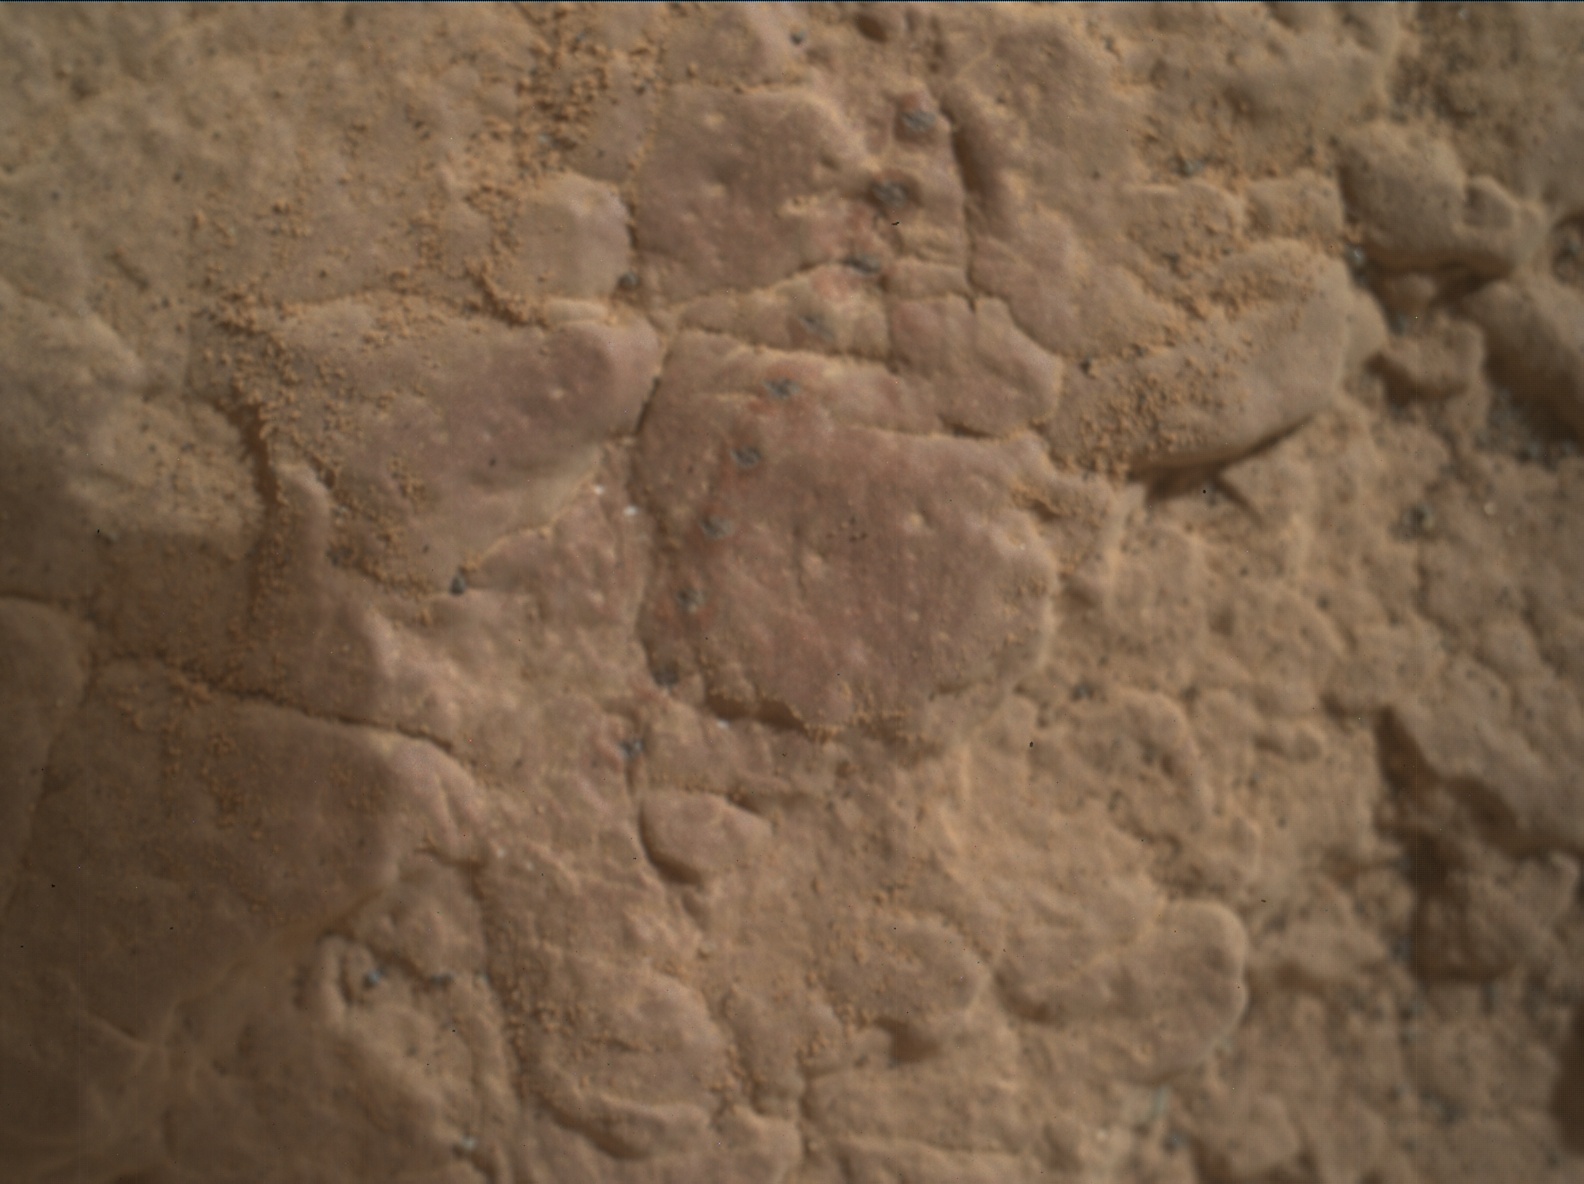 Nasa's Mars rover Curiosity acquired this image using its Mars Hand Lens Imager (MAHLI) on Sol 2356